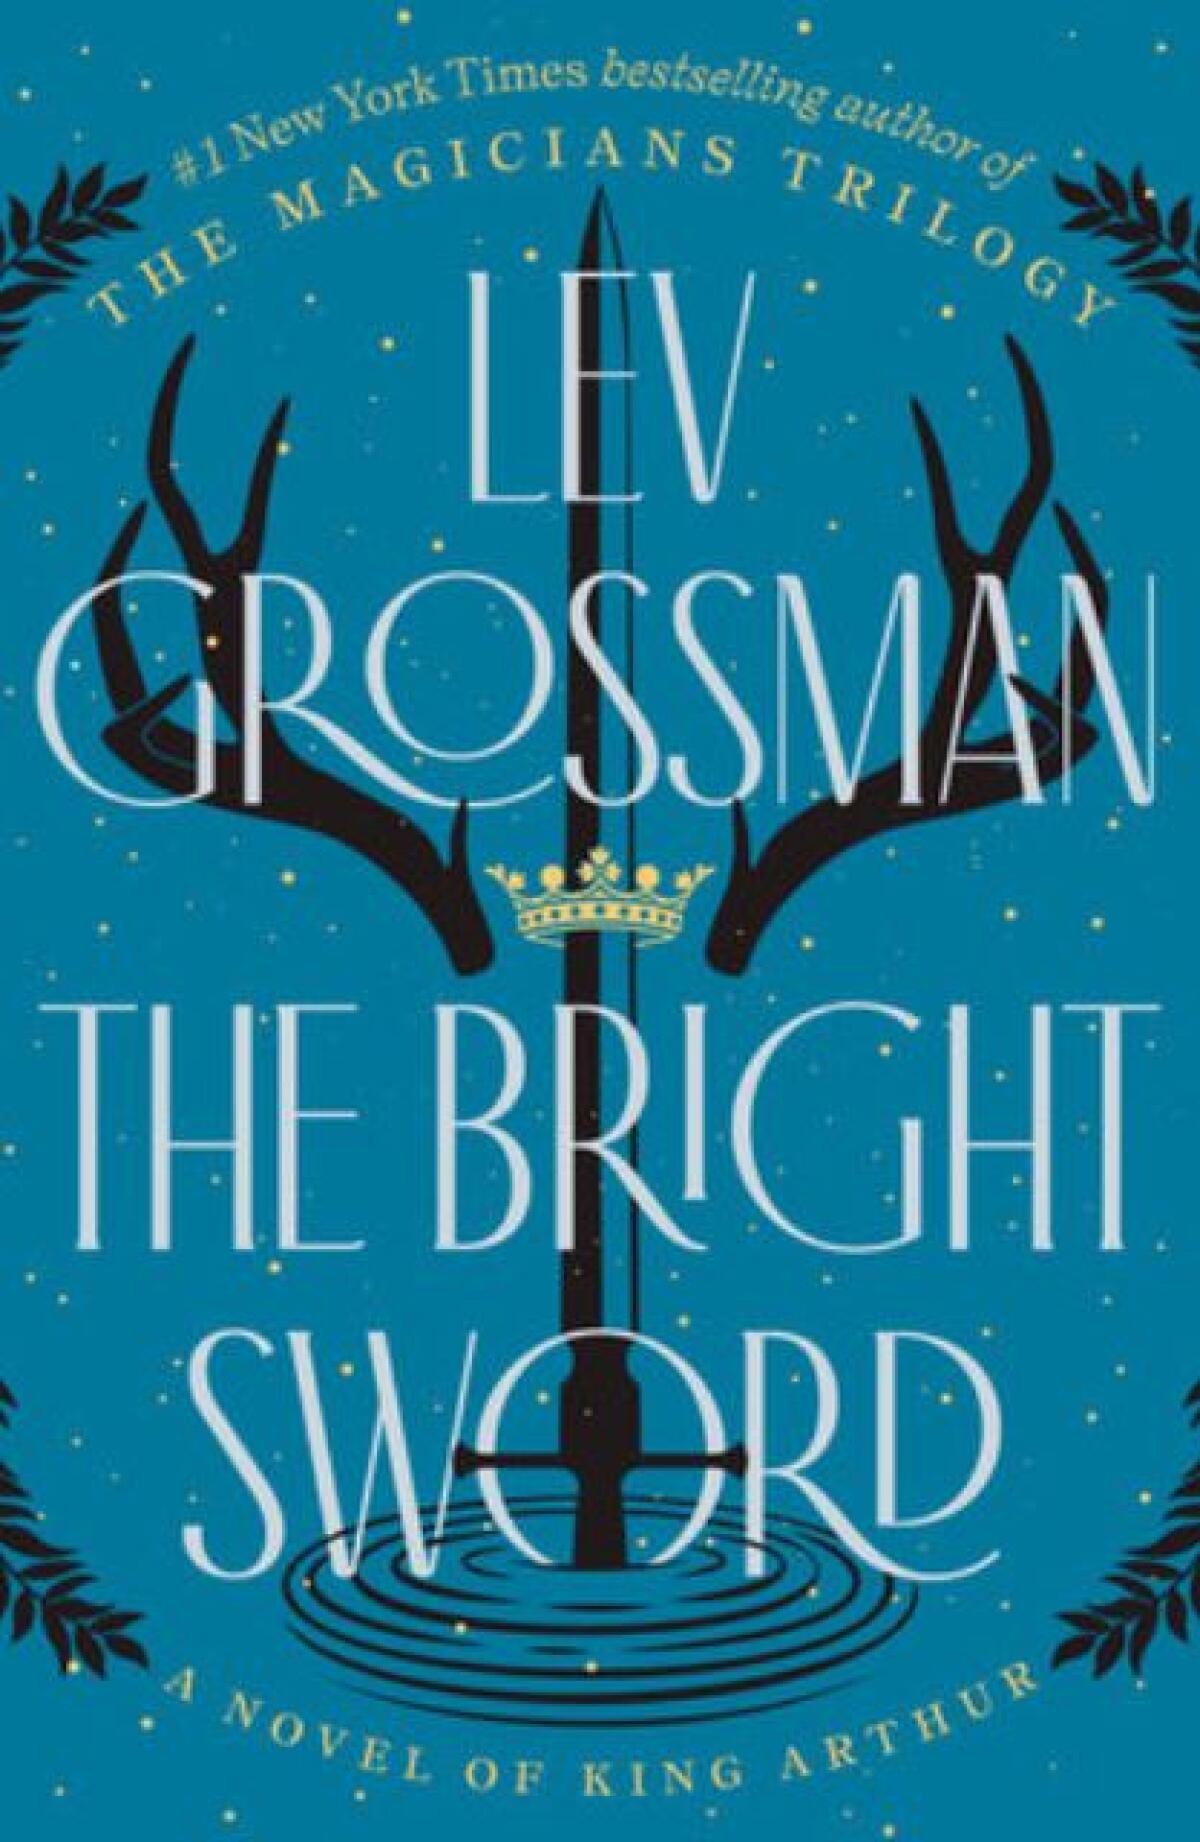 Cover of "The Bright Sword"